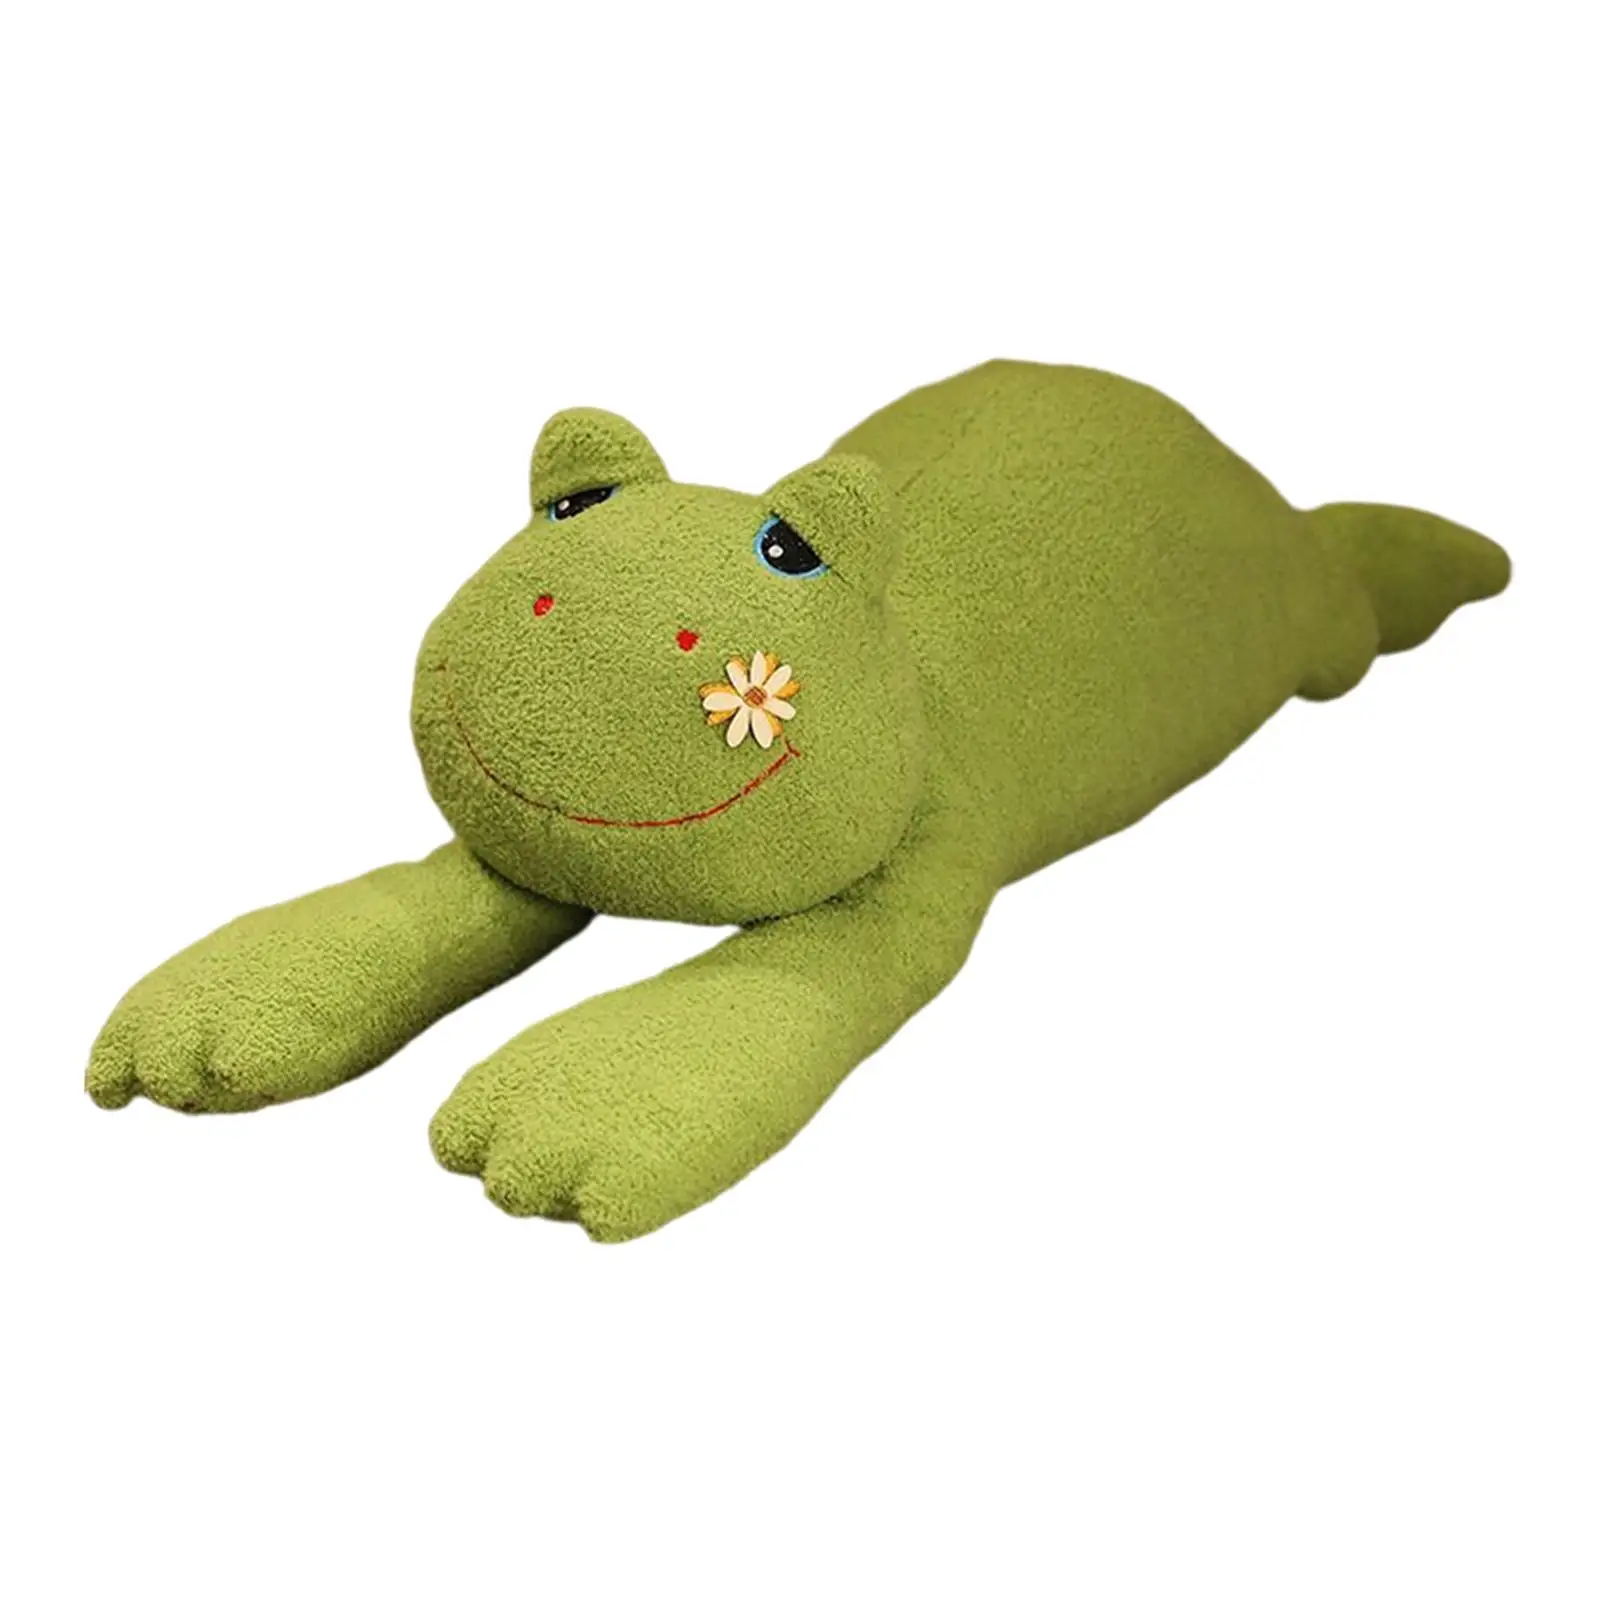 Cuddly Frog Plush Doll Pillow Home Decoration Cute Stuffed Animal for Theme Party Sofa Decor Birthday Gifts Children Toddlers